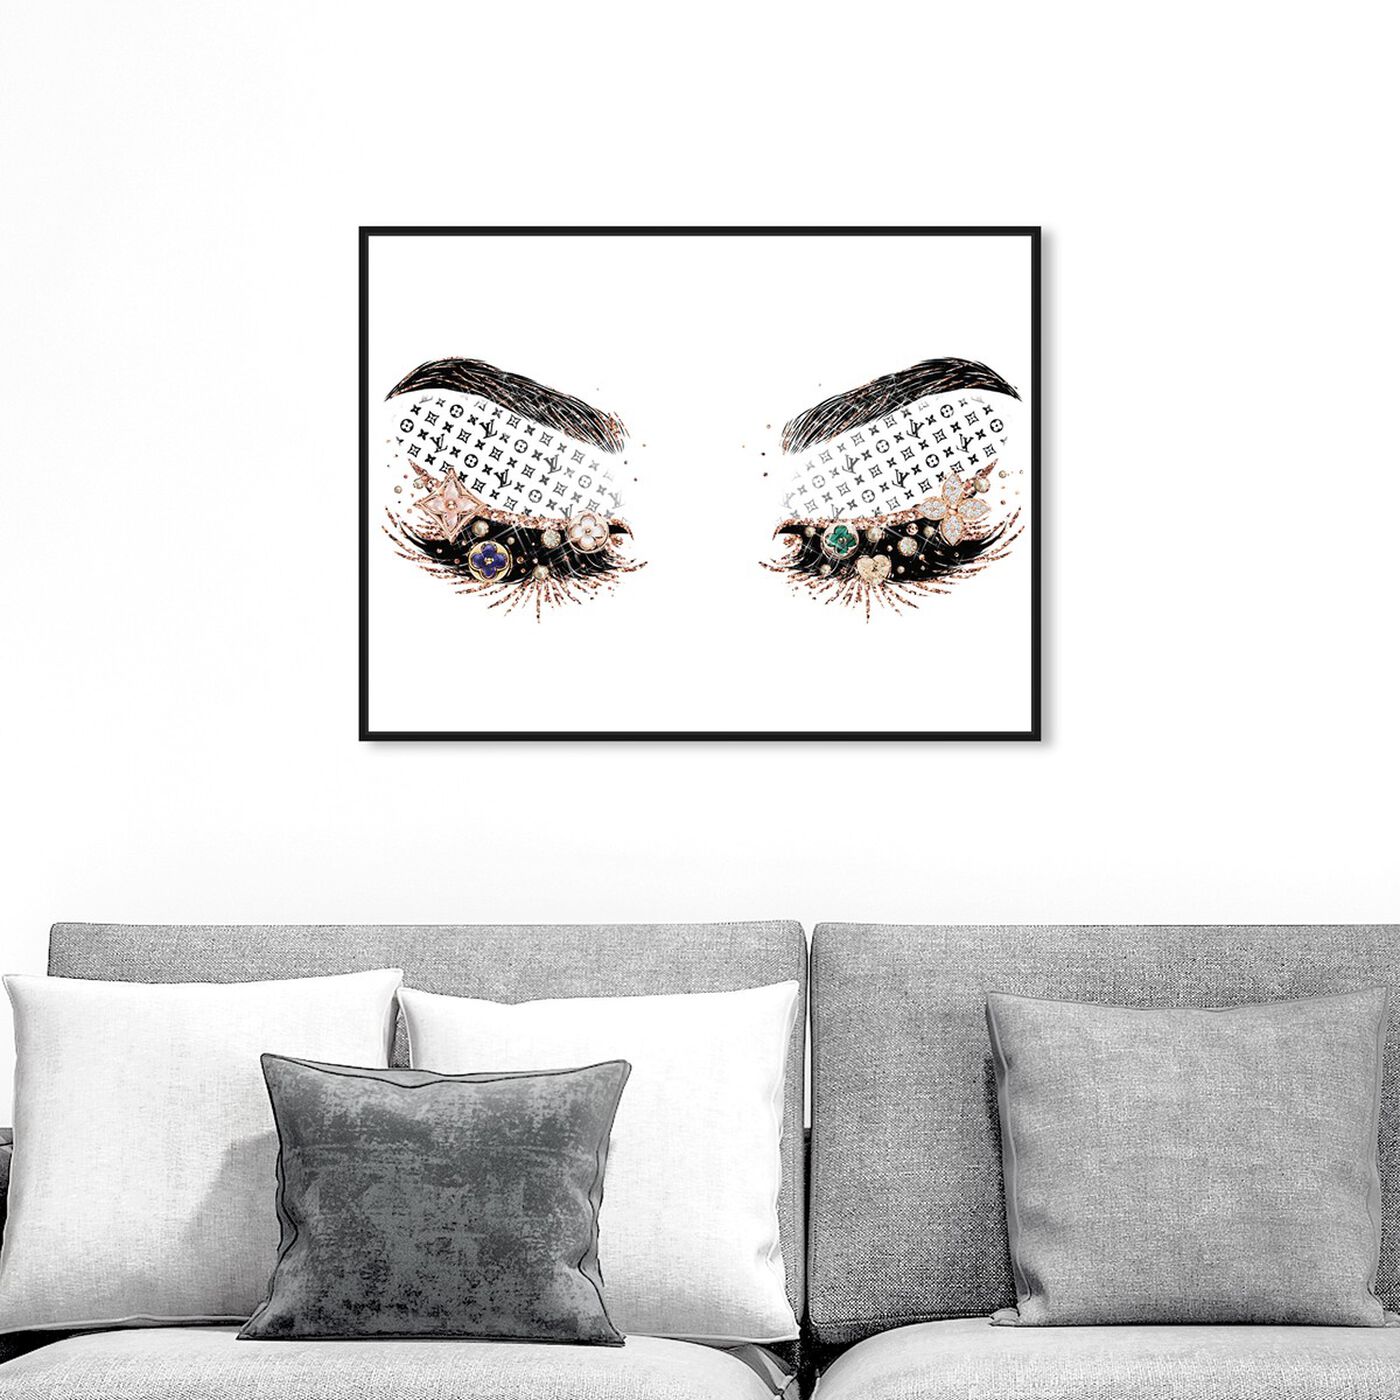 Hanging view of Louis Eyeshadows featuring fashion and glam and makeup art.